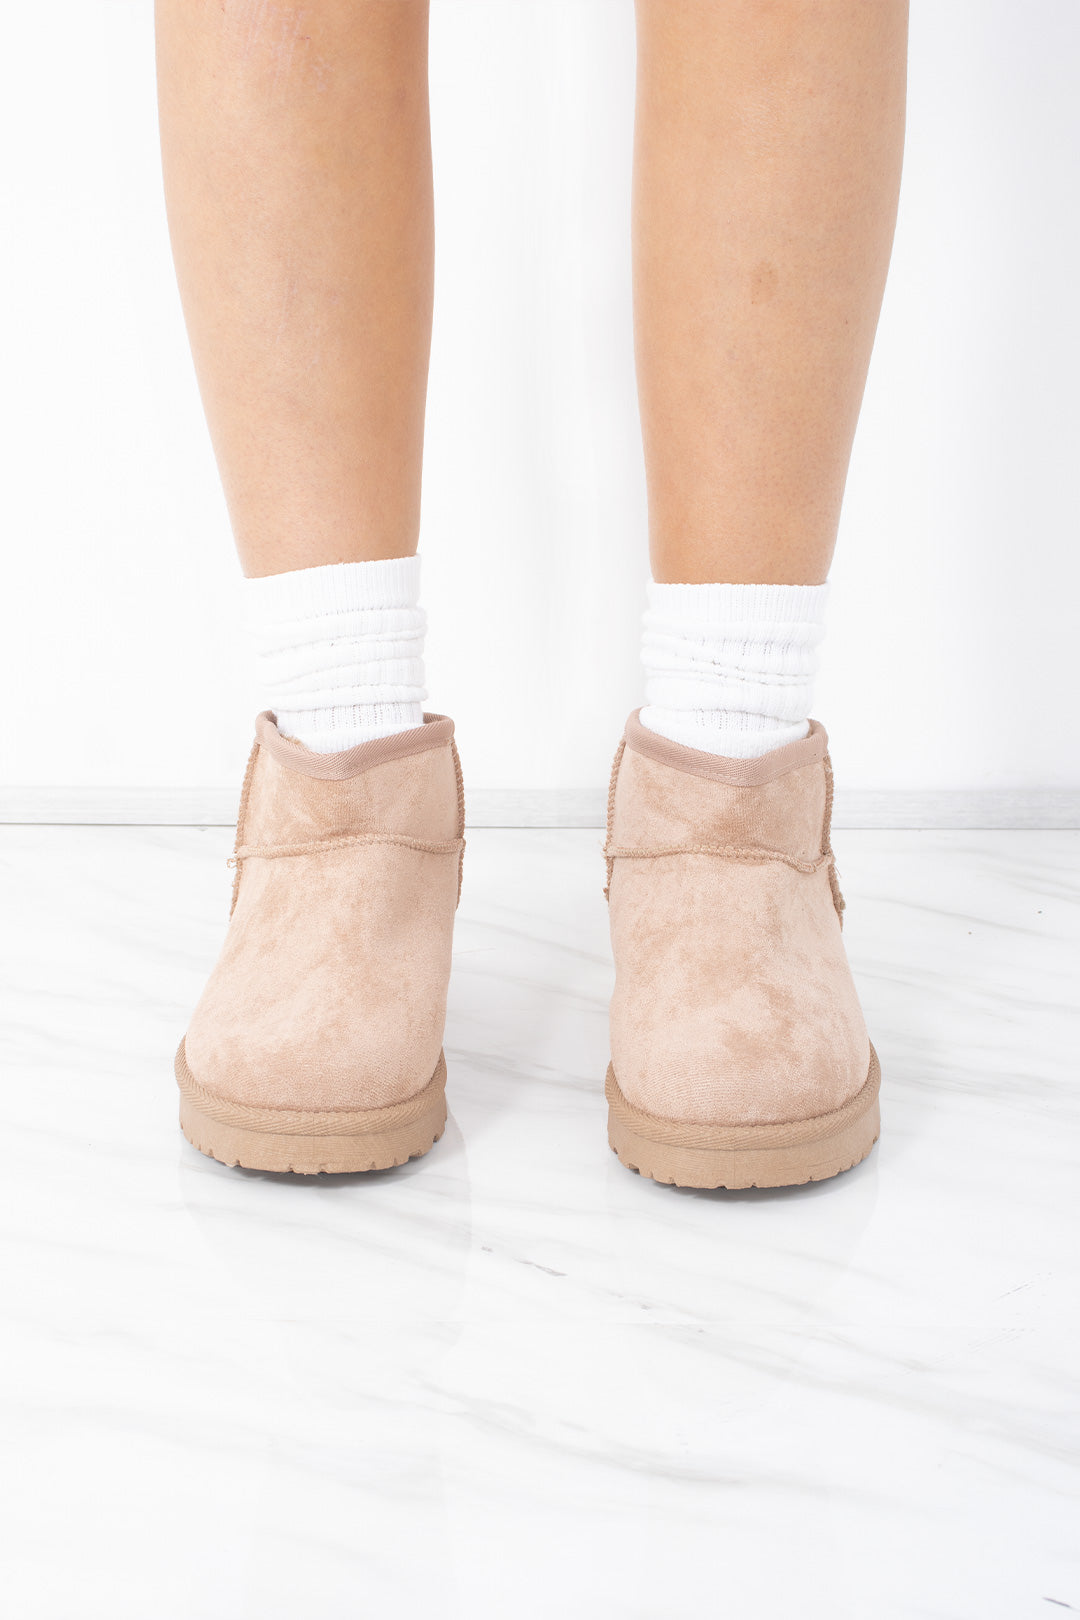 Ultra Mini Ankle Length Faux Fur Lining Boots In Beige Faux Suede